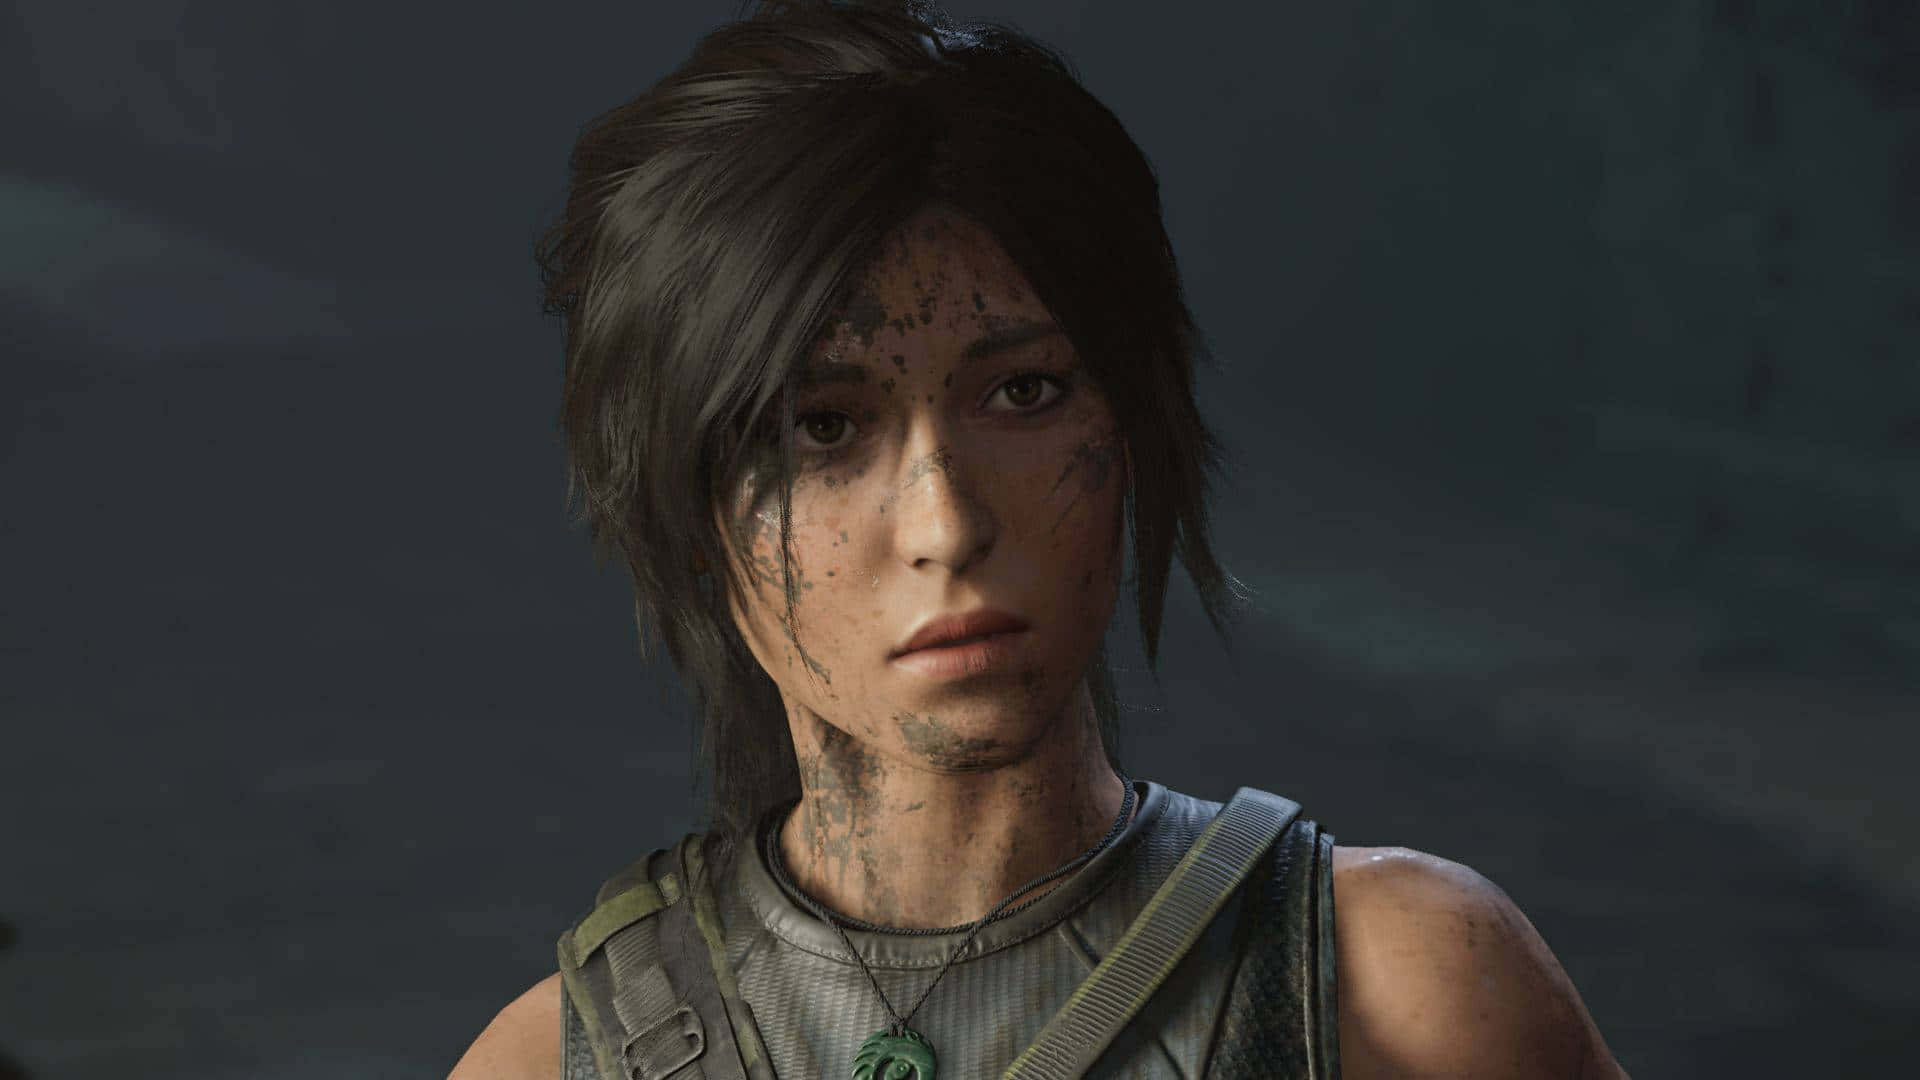 The Tomb Raider Character Is Looking At The Camera Wallpaper